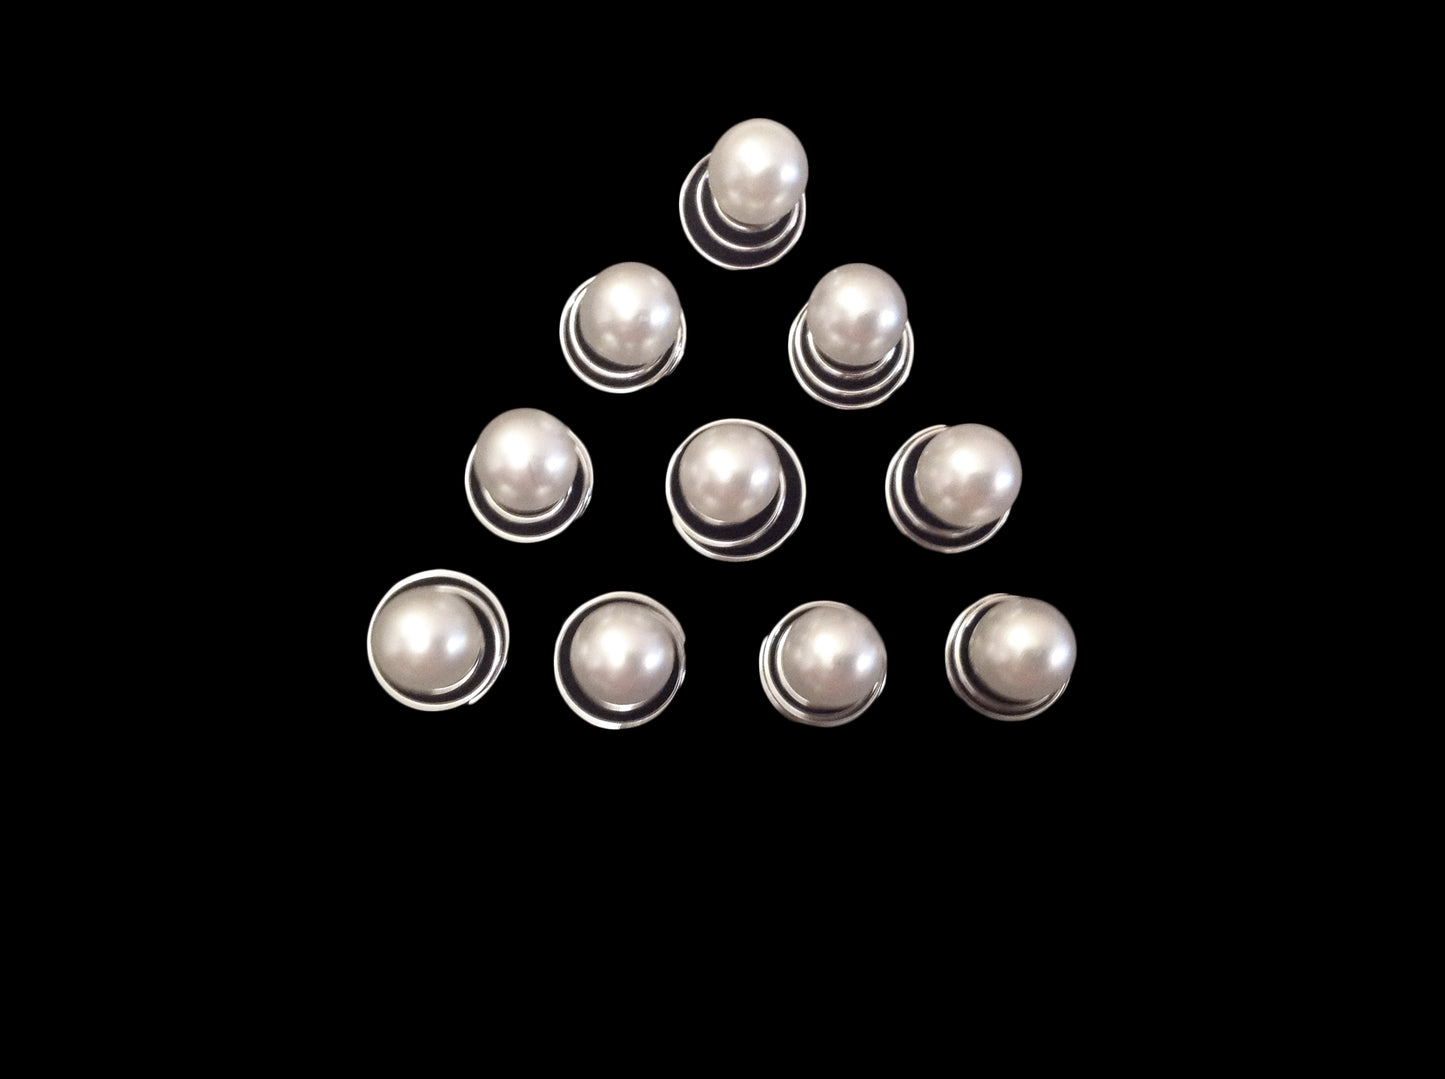 Classic Pearl Hair Jewels, create a classic and feminine look by adding these faux pearl hair jewels, coils, spirals, twists to your outfit. The perfect decoration for all special occasions including communion, proms and weddings